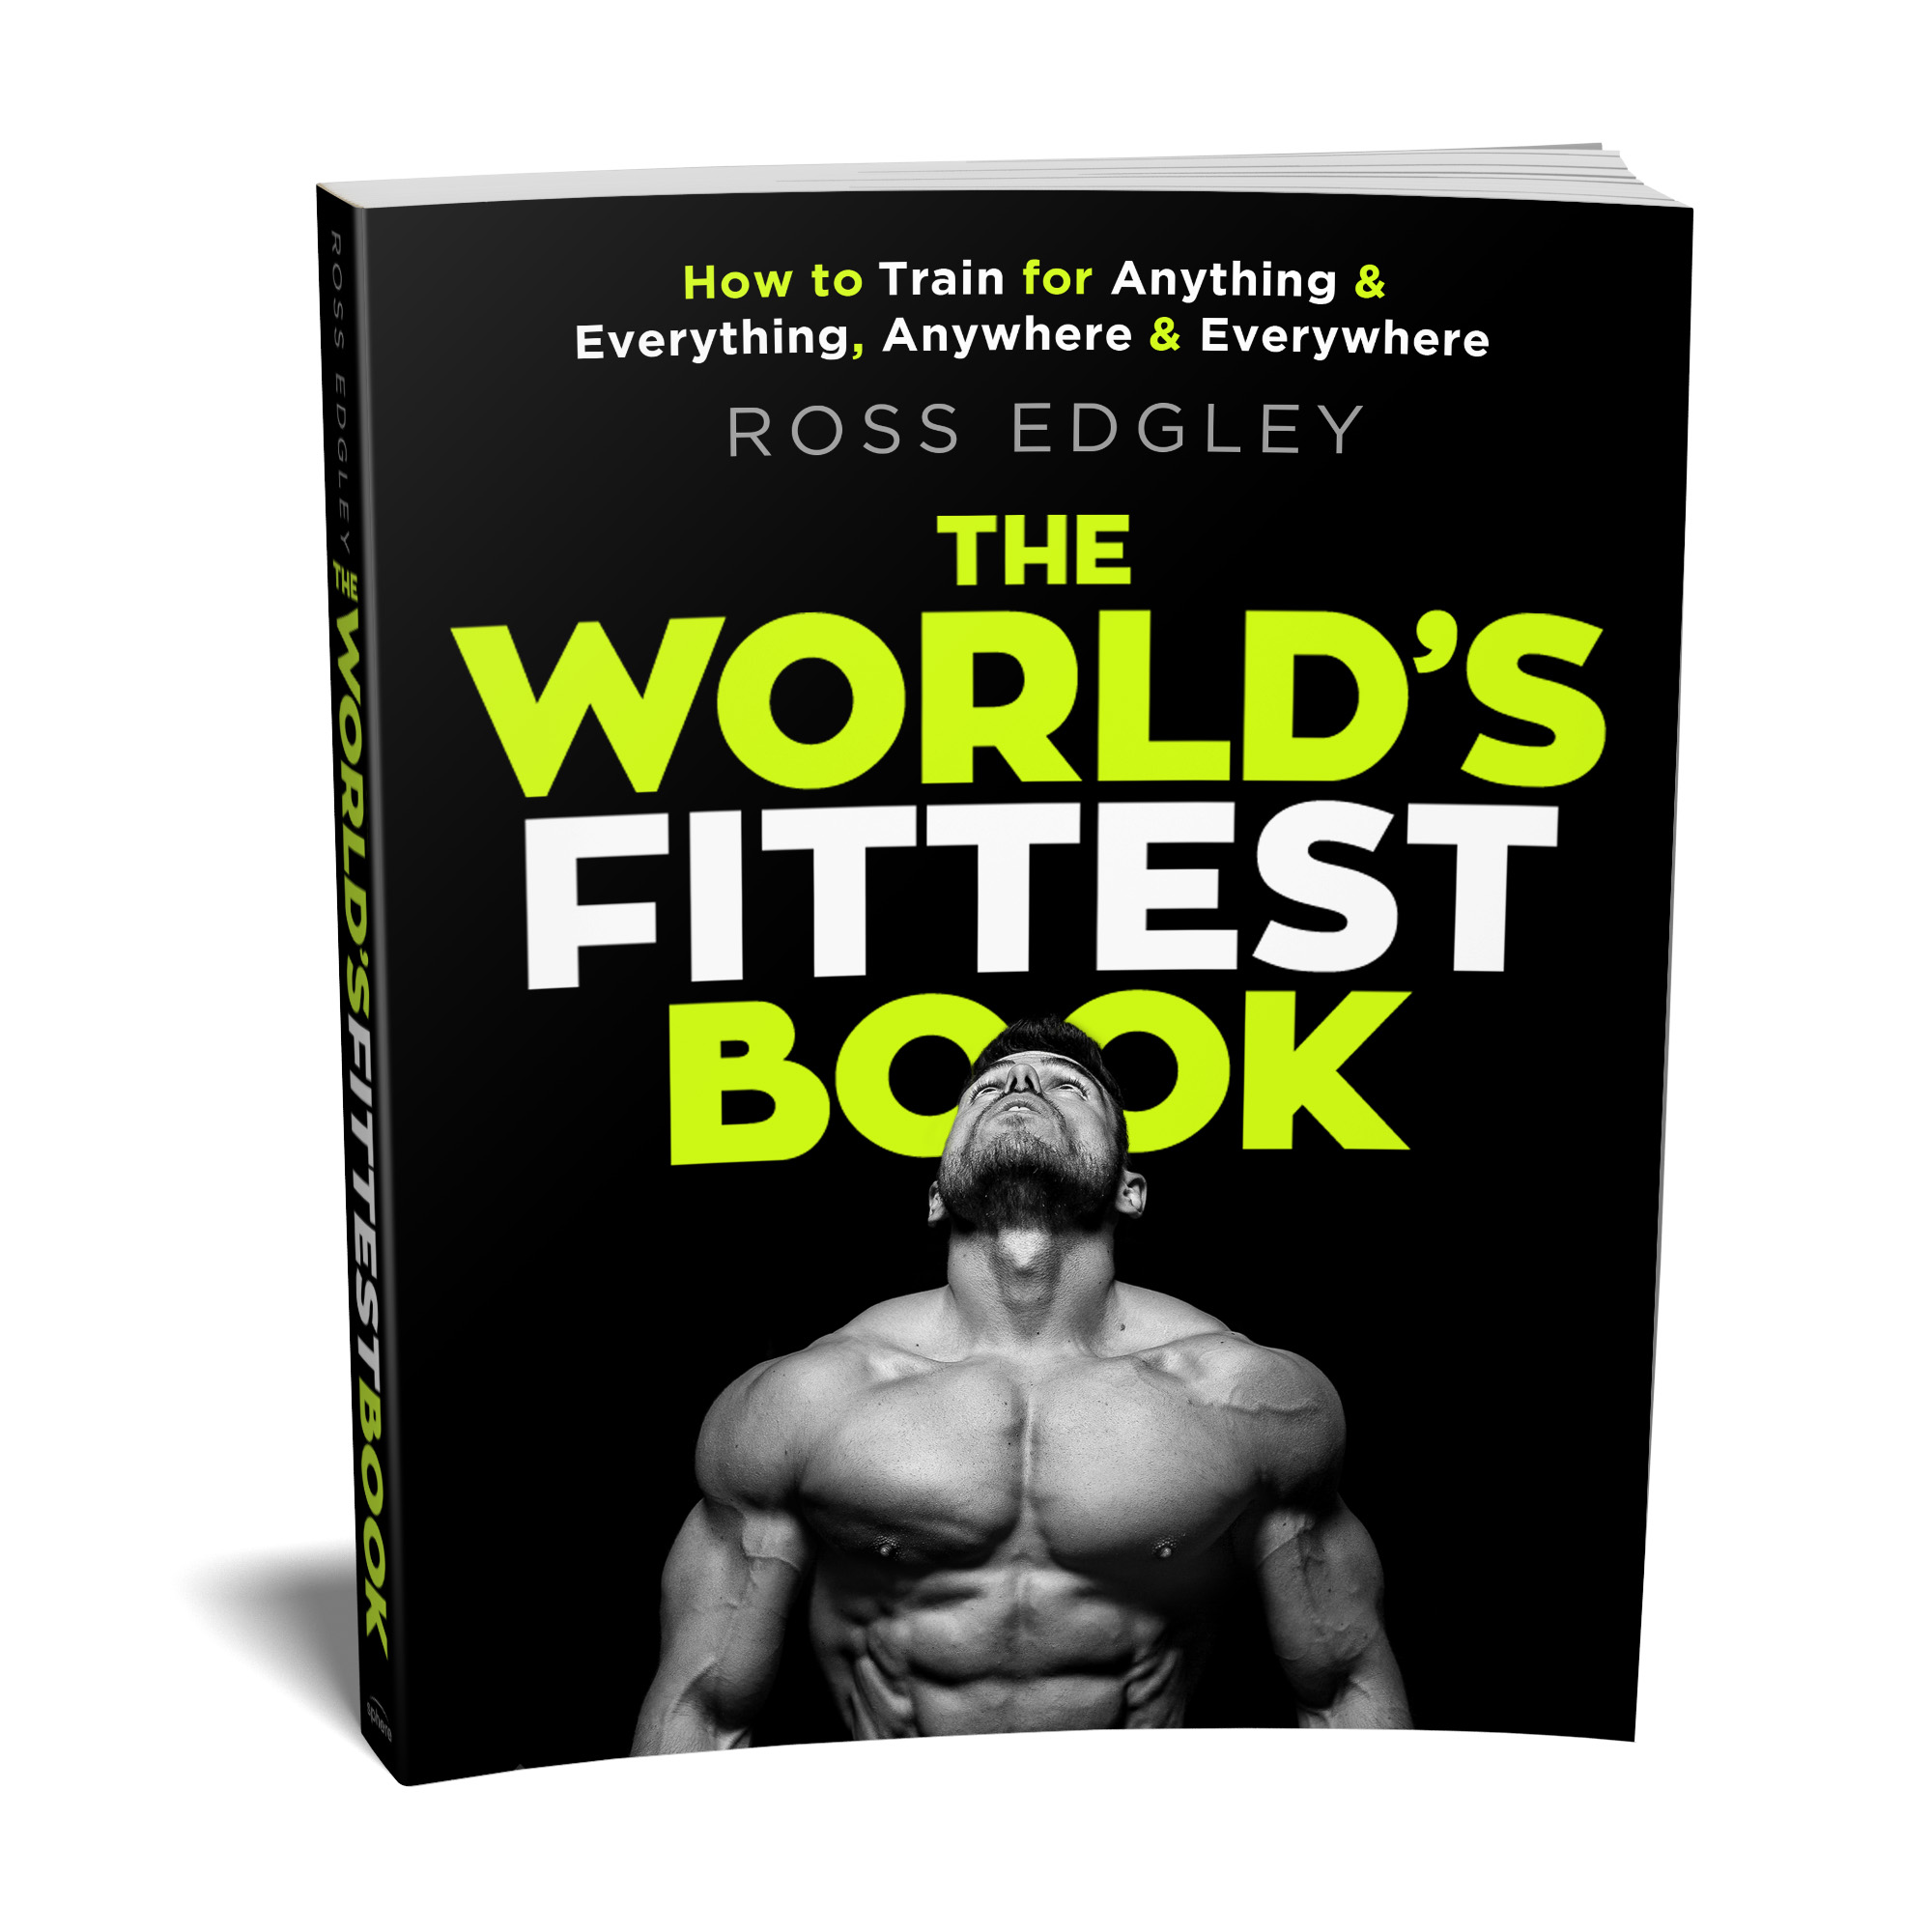 The 7 Best Workout Books of 2021 - The World's Fittest Book by Ross Edgley